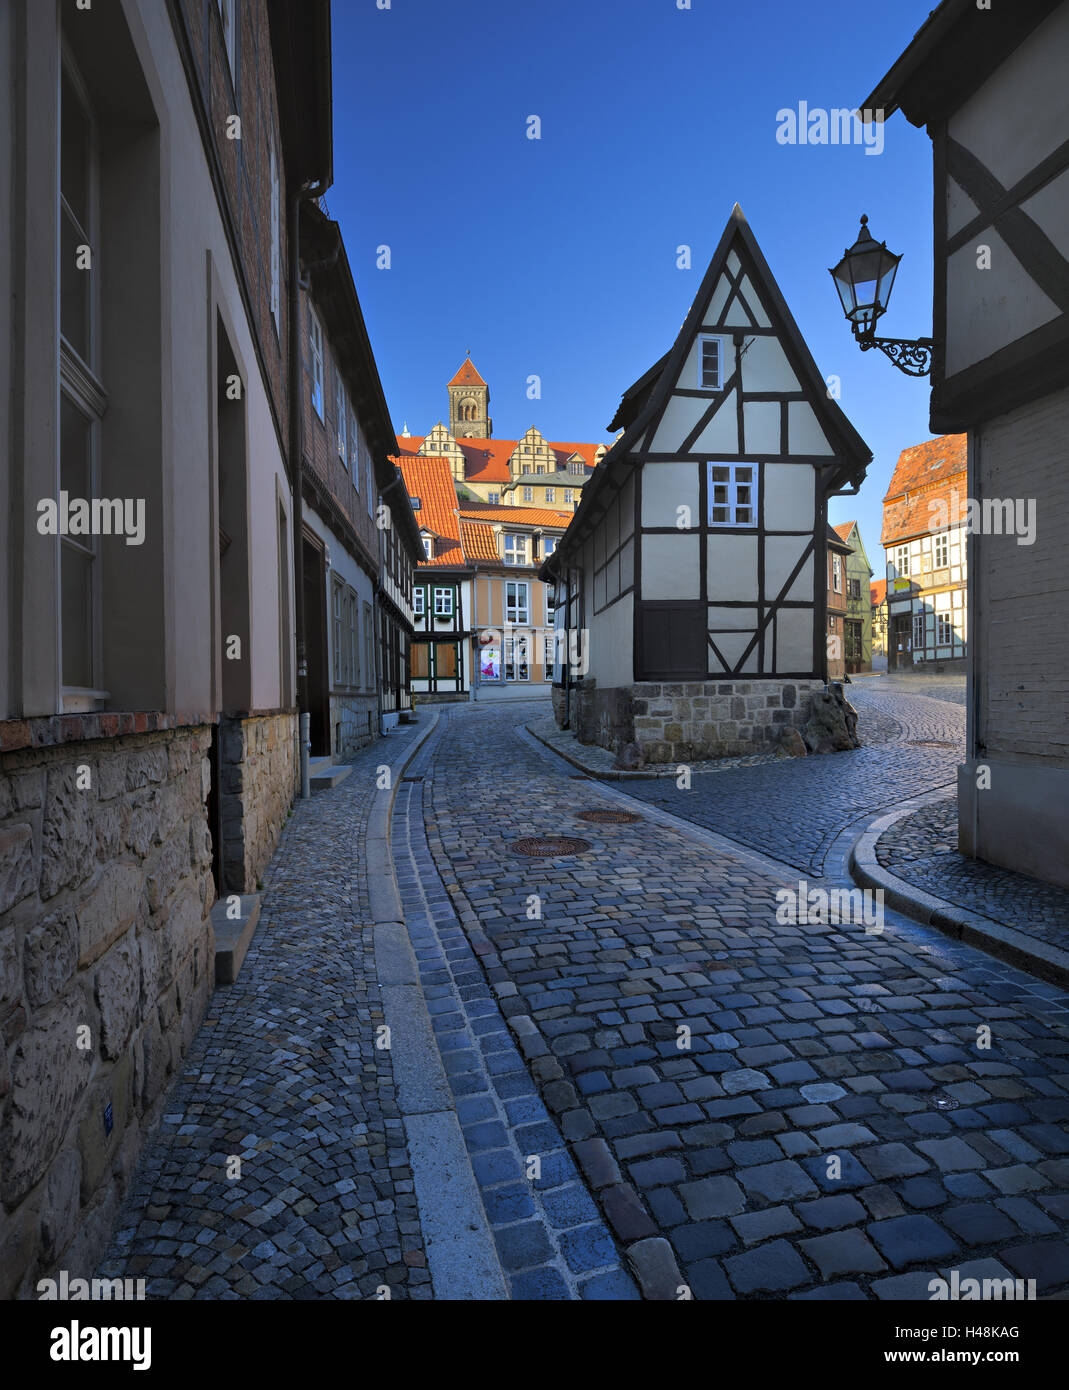 Germany, Saxony-Anhalt, Quedlinburg, old town, townscape, Finkenherd, architectural style, half-timbered, alley, narrow, cobblestones, half-timbered houses, town hall, architecture, historical, medieval, Harz, romantical, typical, idyllic, tourism, place Stock Photo